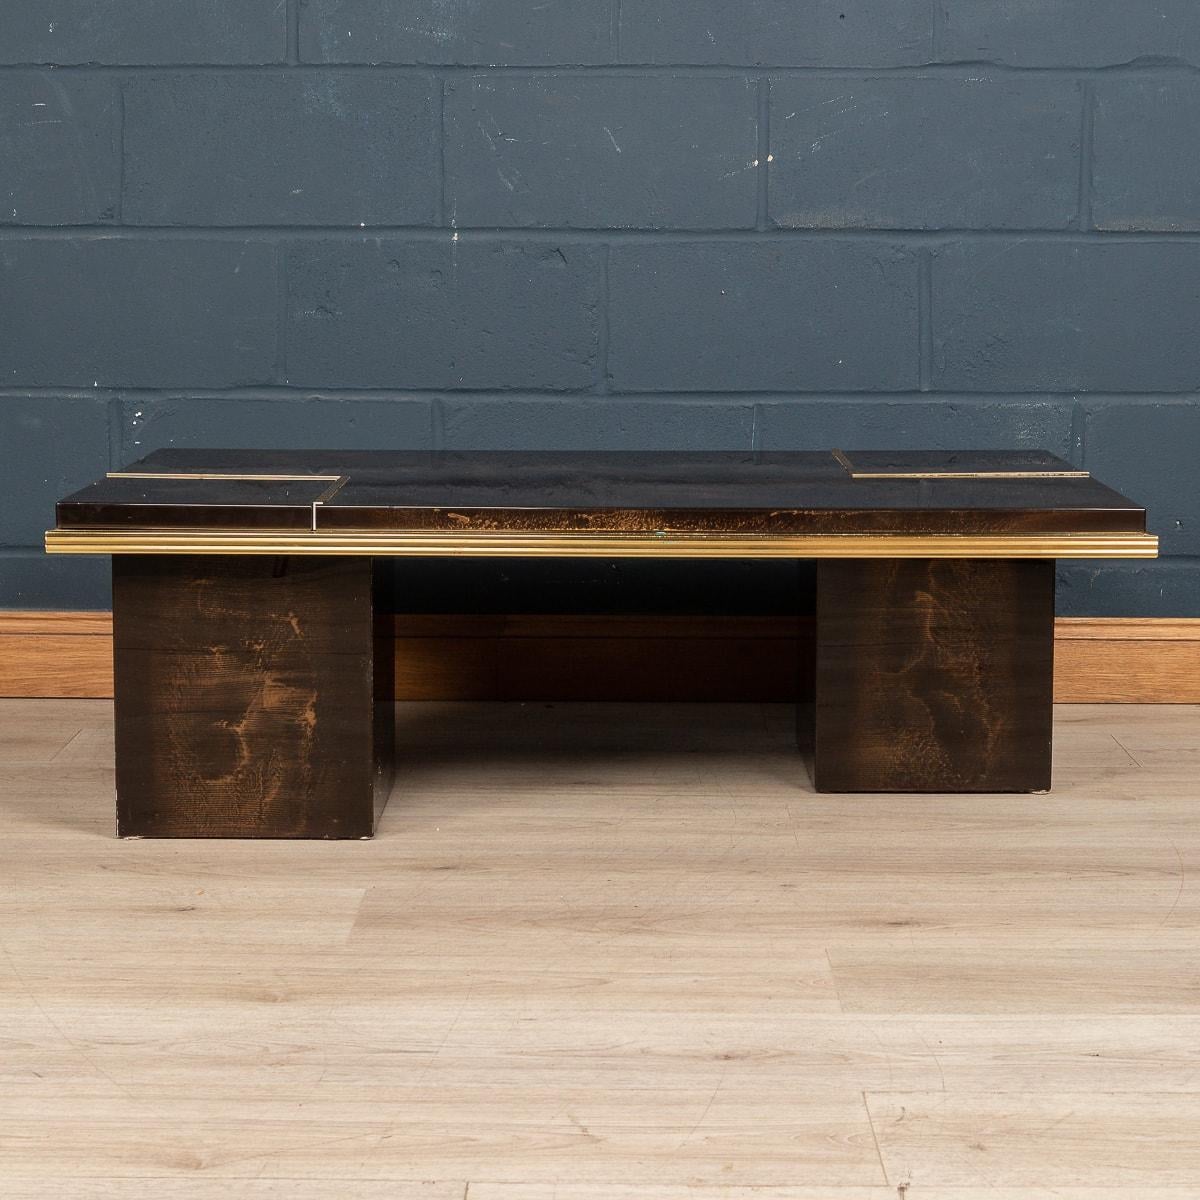 A most unusual “hidden bar“ coffee table made in the latter part of the 20th century. Likely to have been made in Italy or France, the clever design has the wonderful feature of two compartments that lift to reveal a hidden bar for drinks and